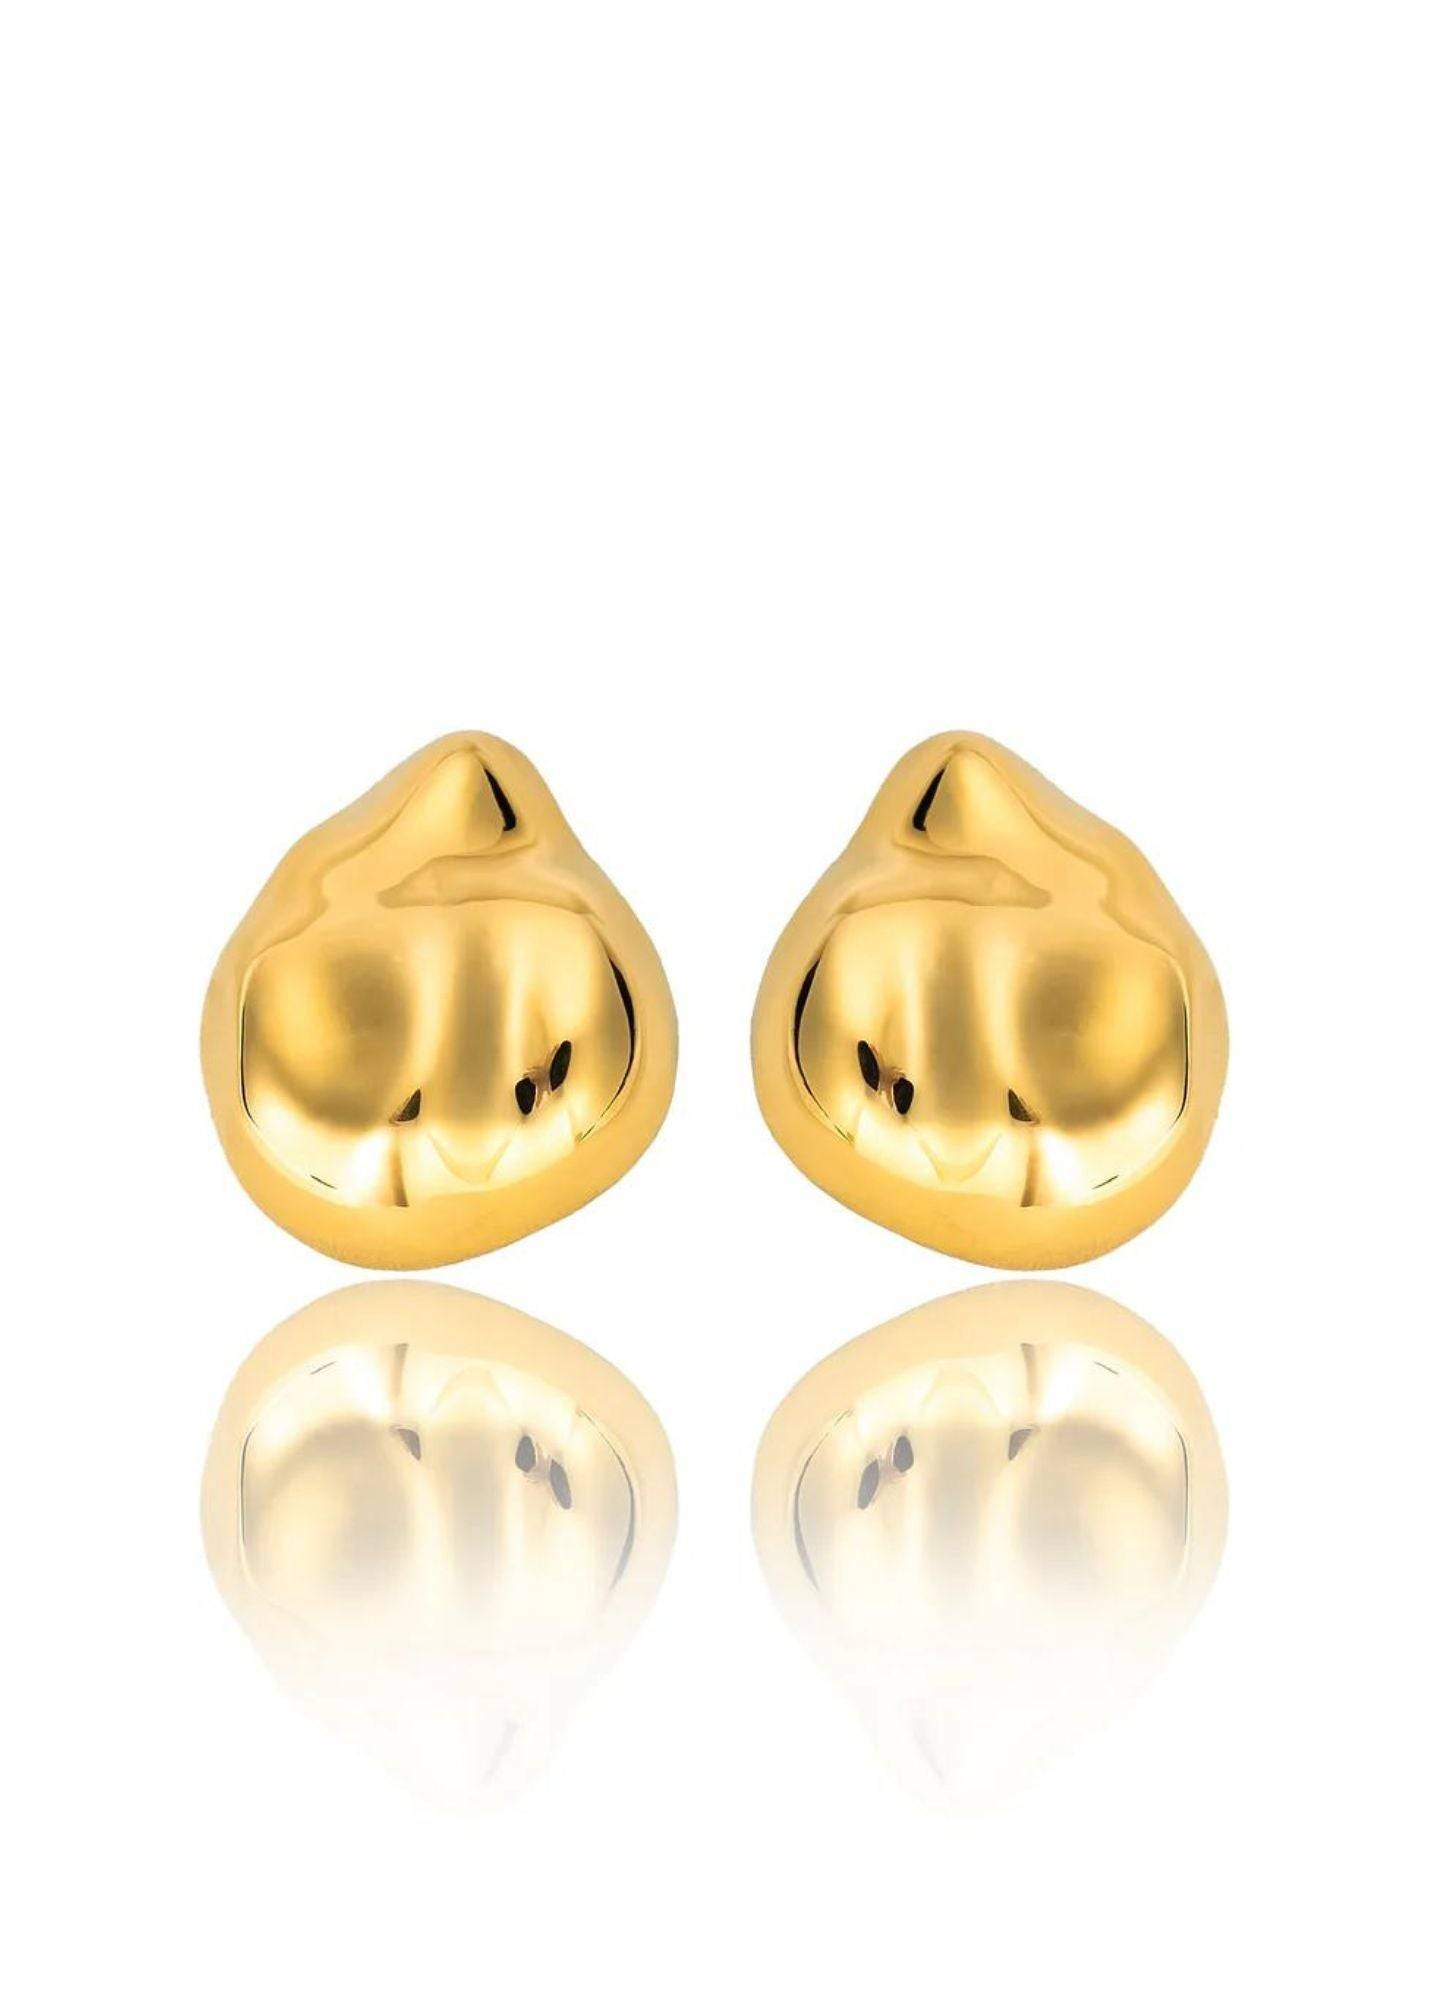 Waffle Posterior Geometric Dome 18K Gold Filled Earrings in gold or rhodium from Inuary.com